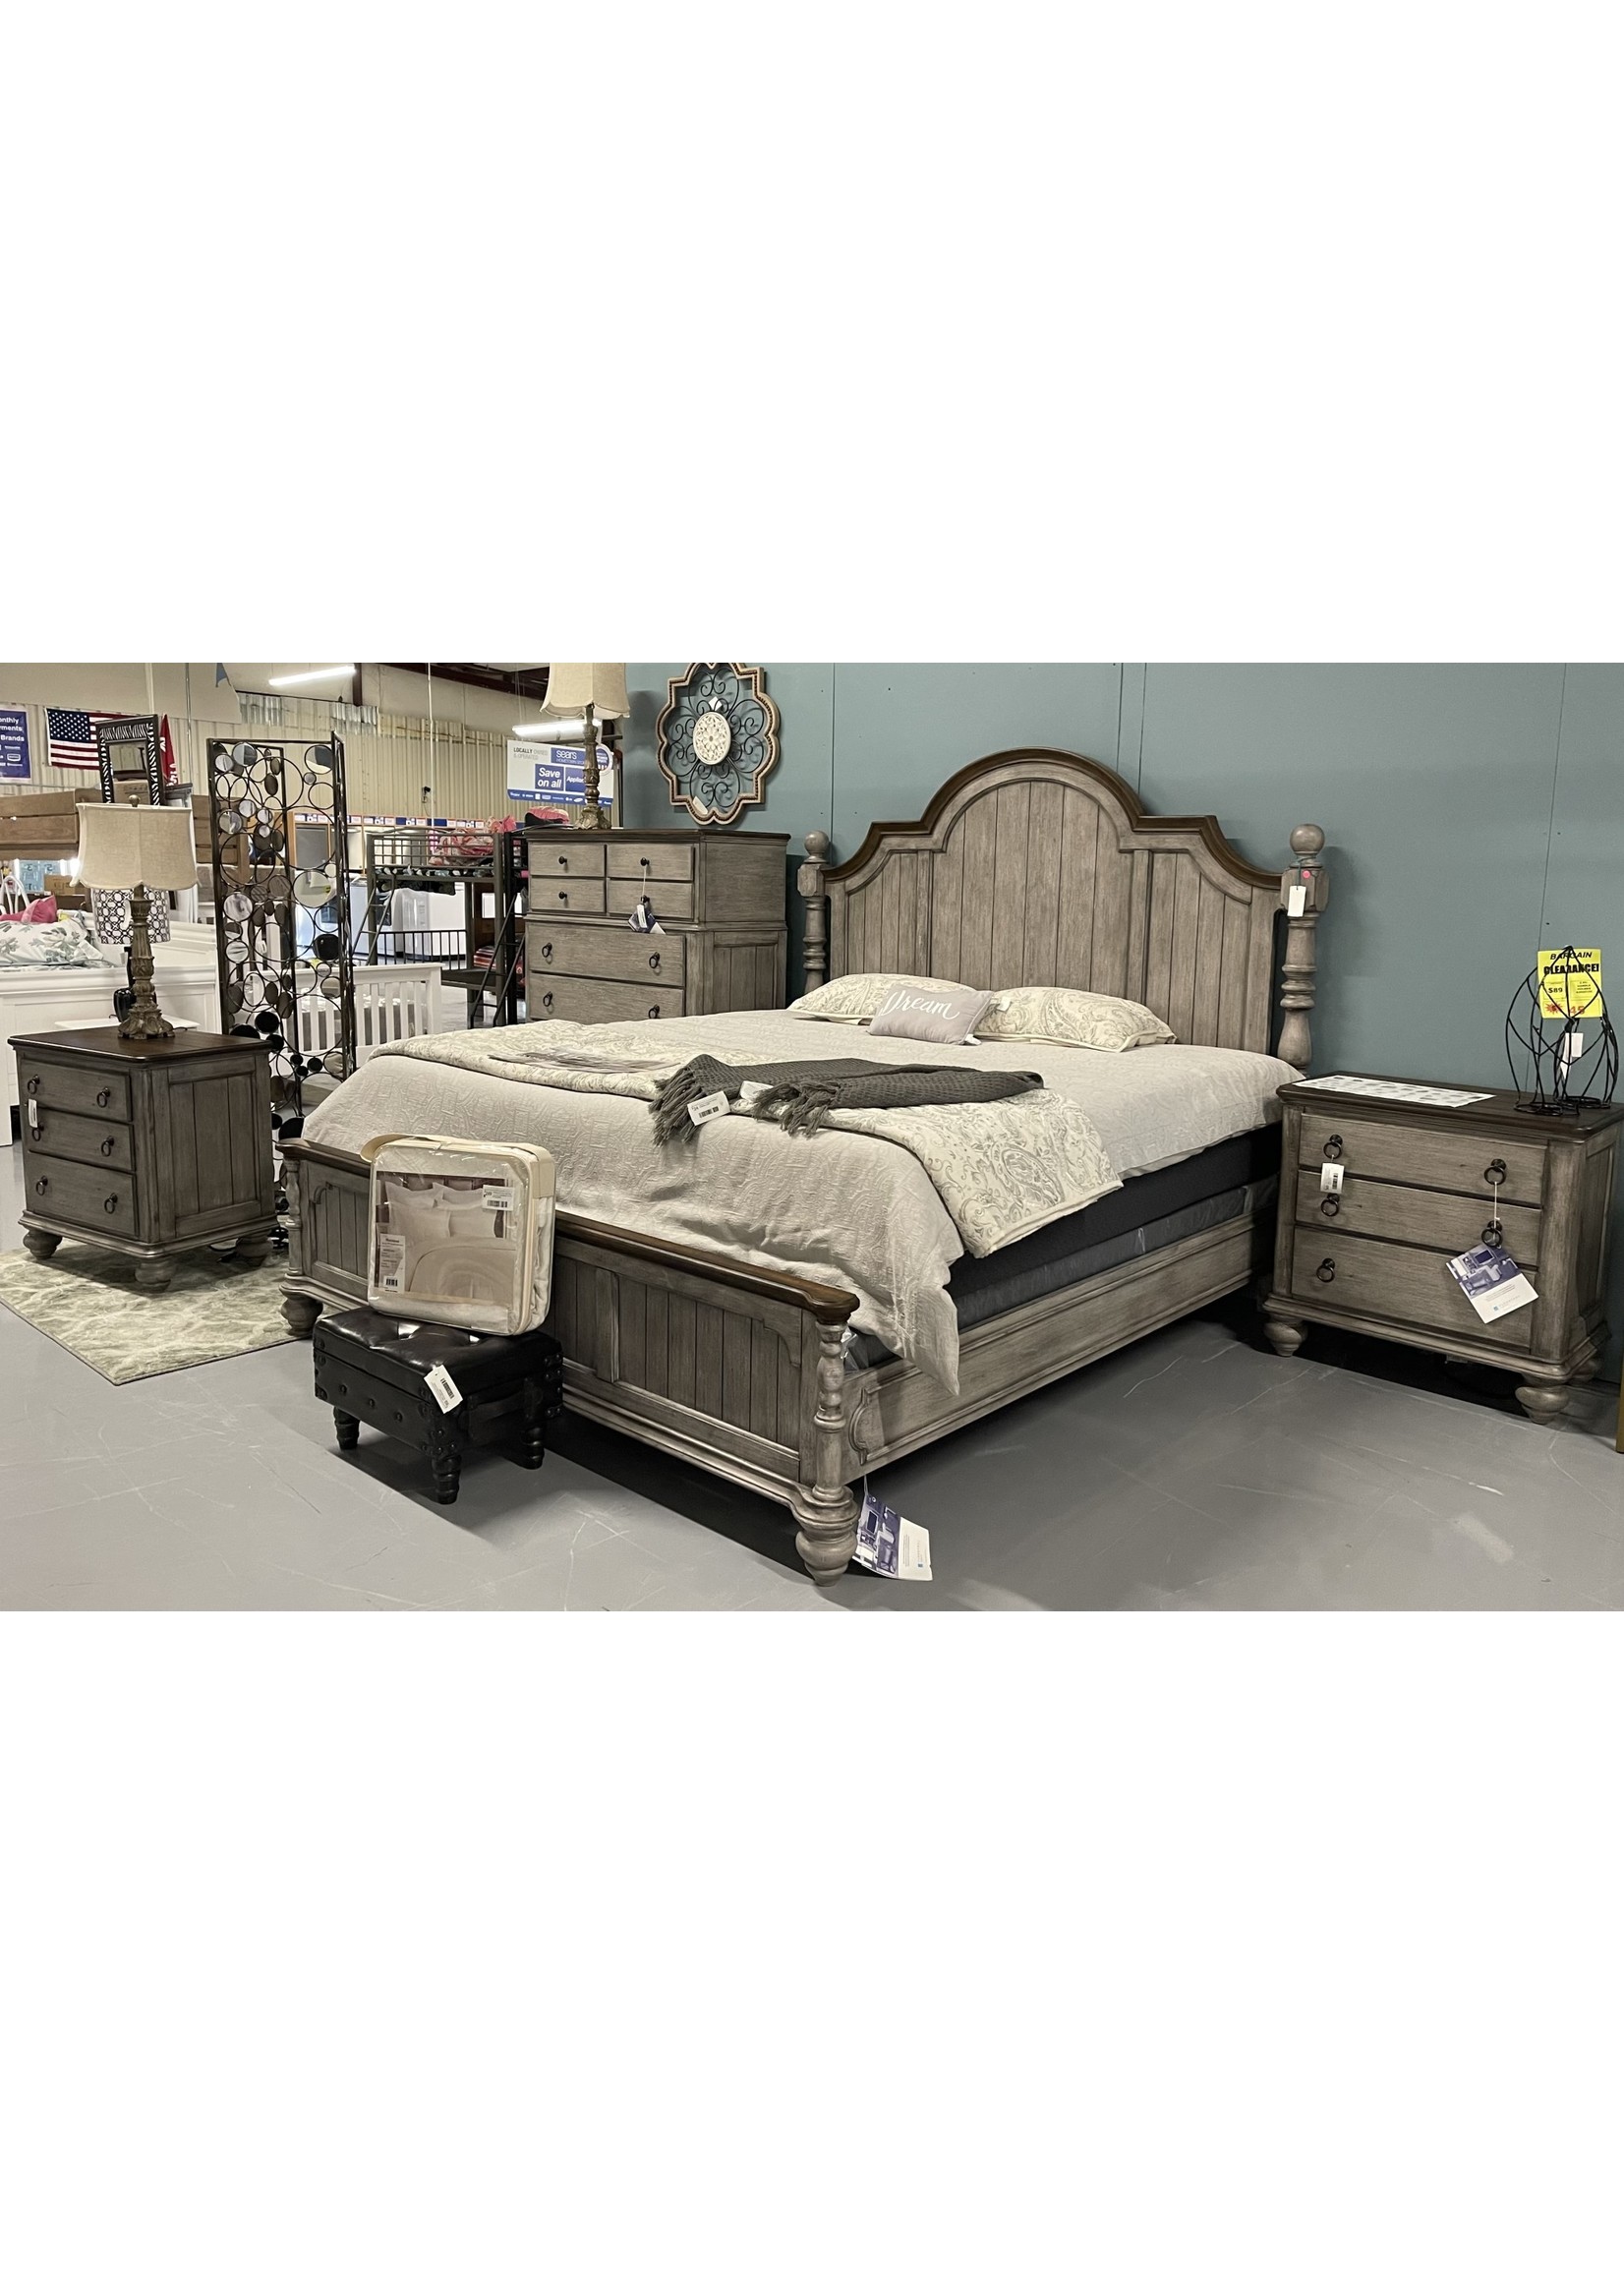 FLEXSTEEL 6/6 POSTER BED PLYMOUTH DISTRESSED WHITEWASH